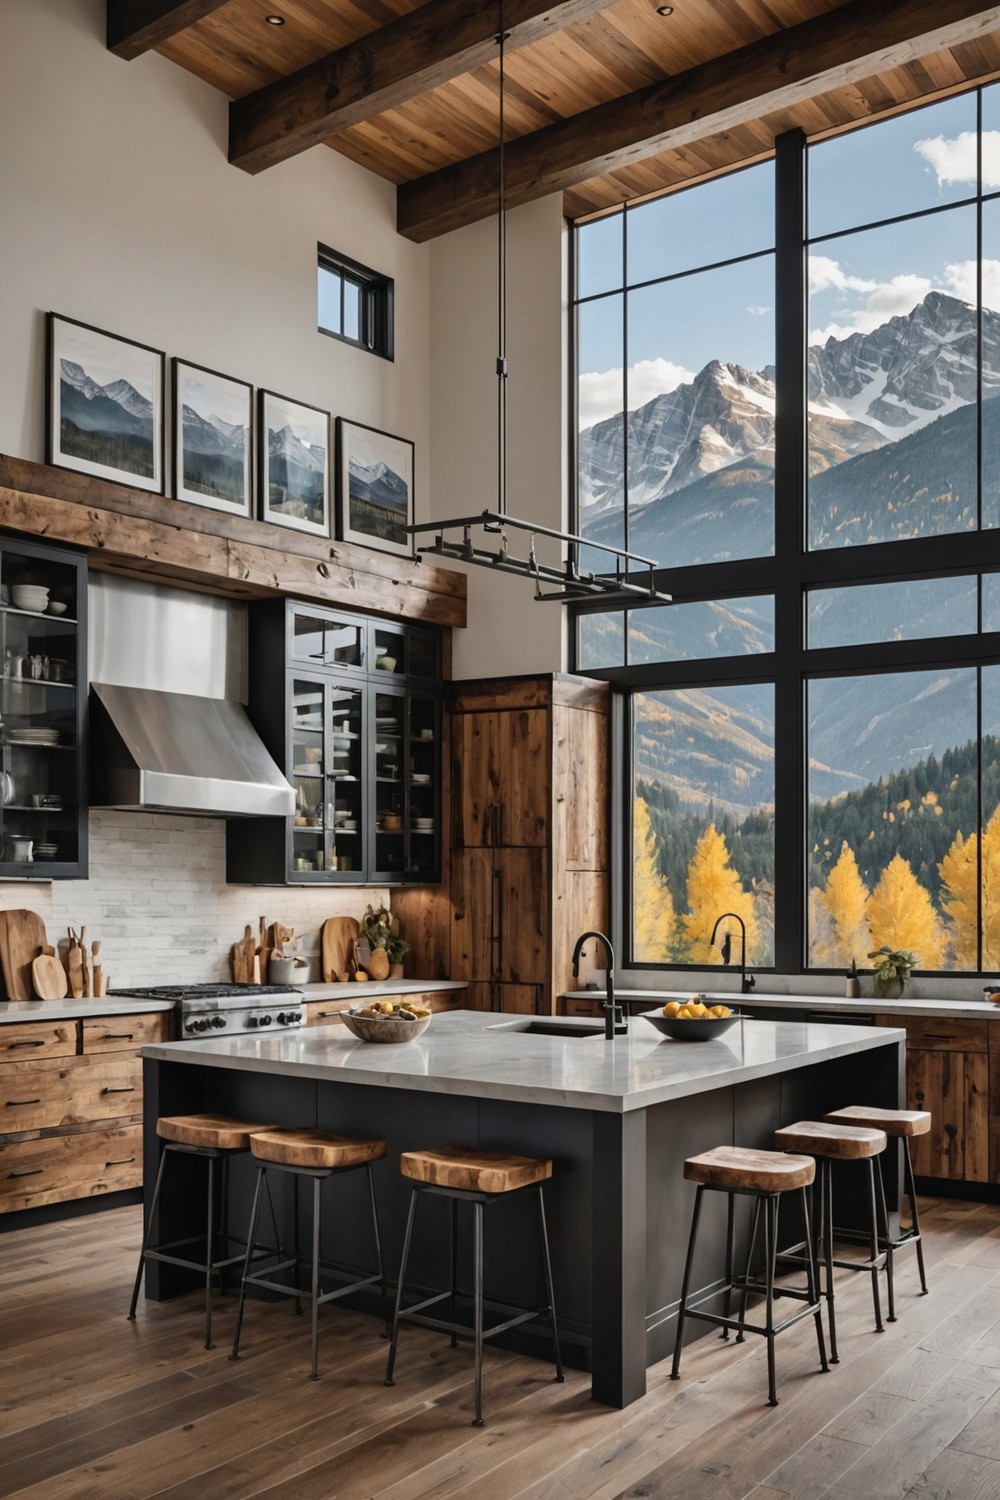 Sleek and Modern Kitchen Designs with Industrial Touches